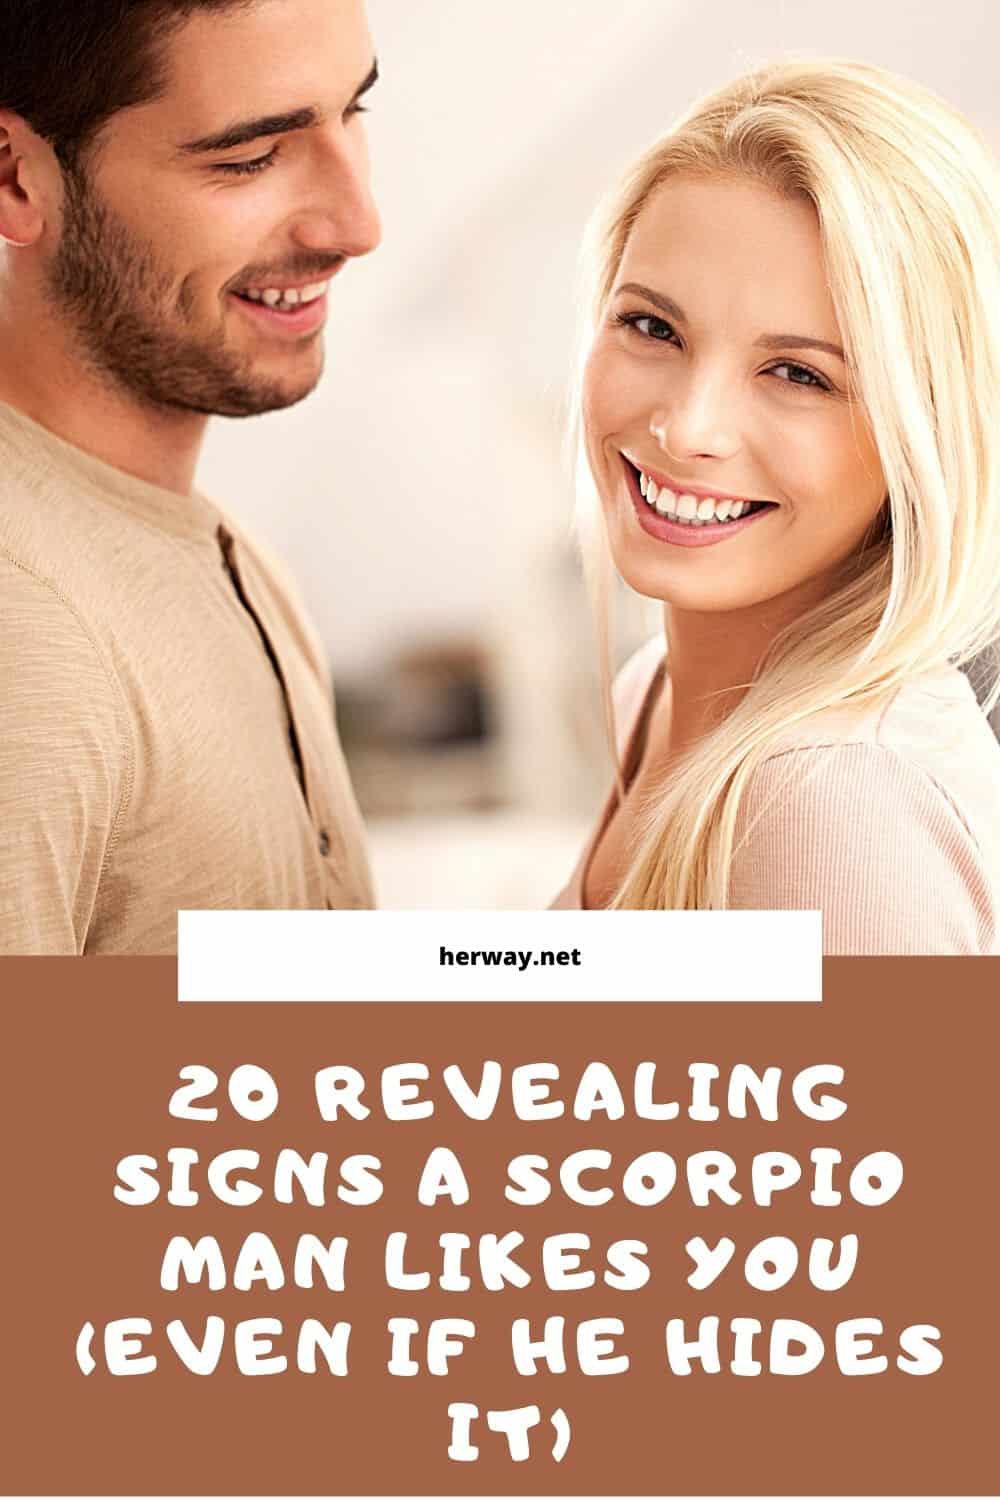 Signs that a scorpio man has feelings for you